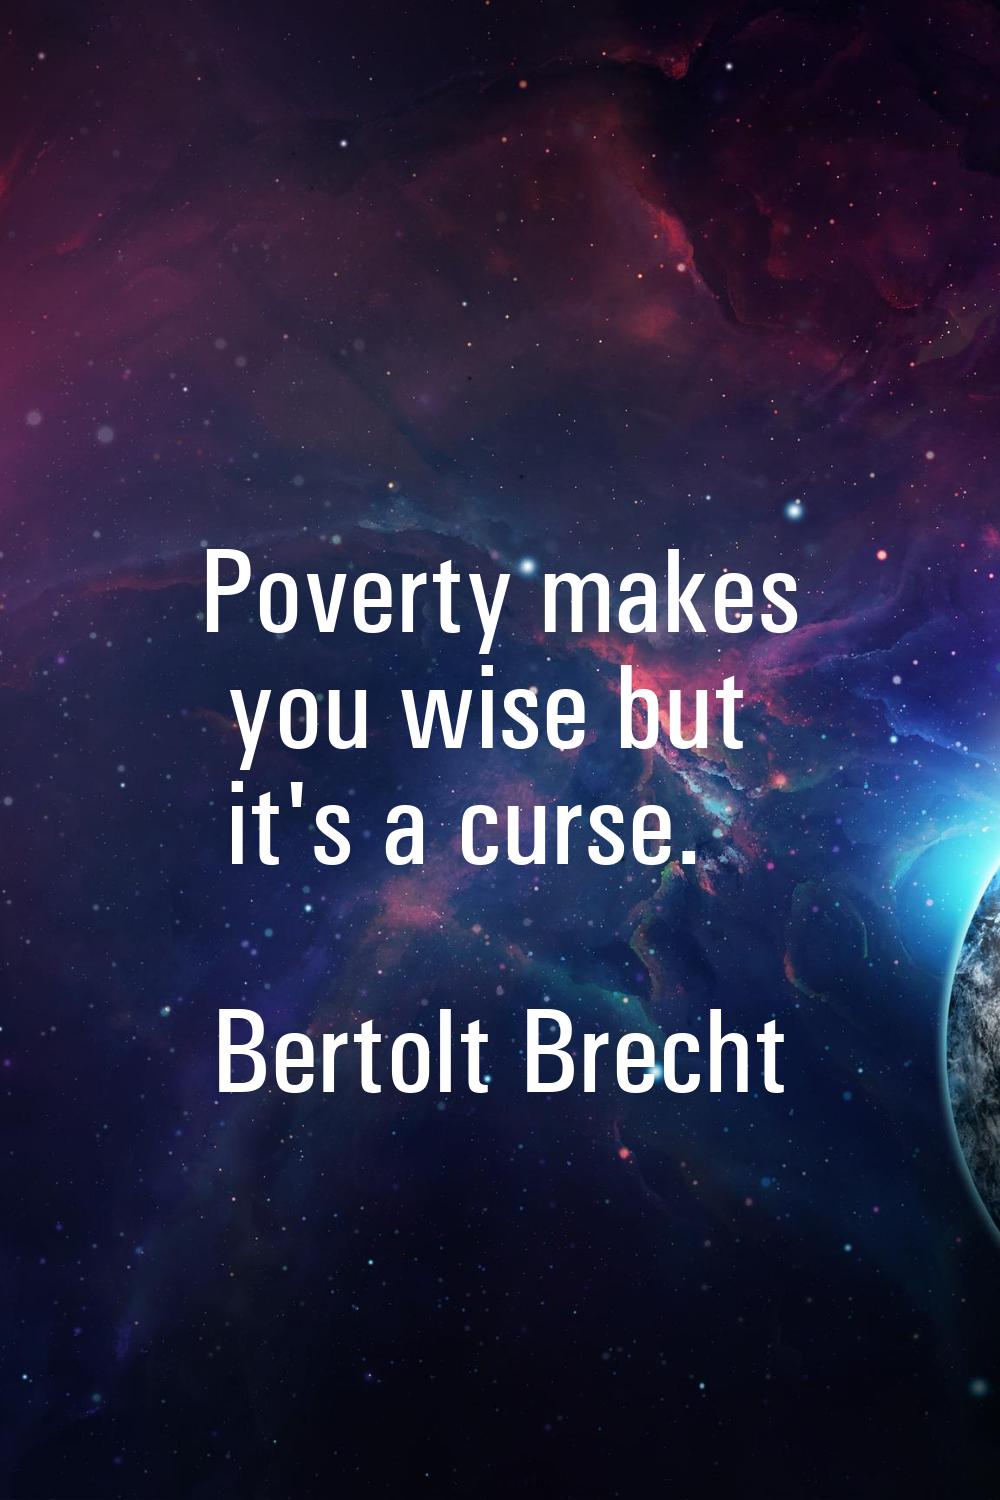 Poverty makes you wise but it's a curse.